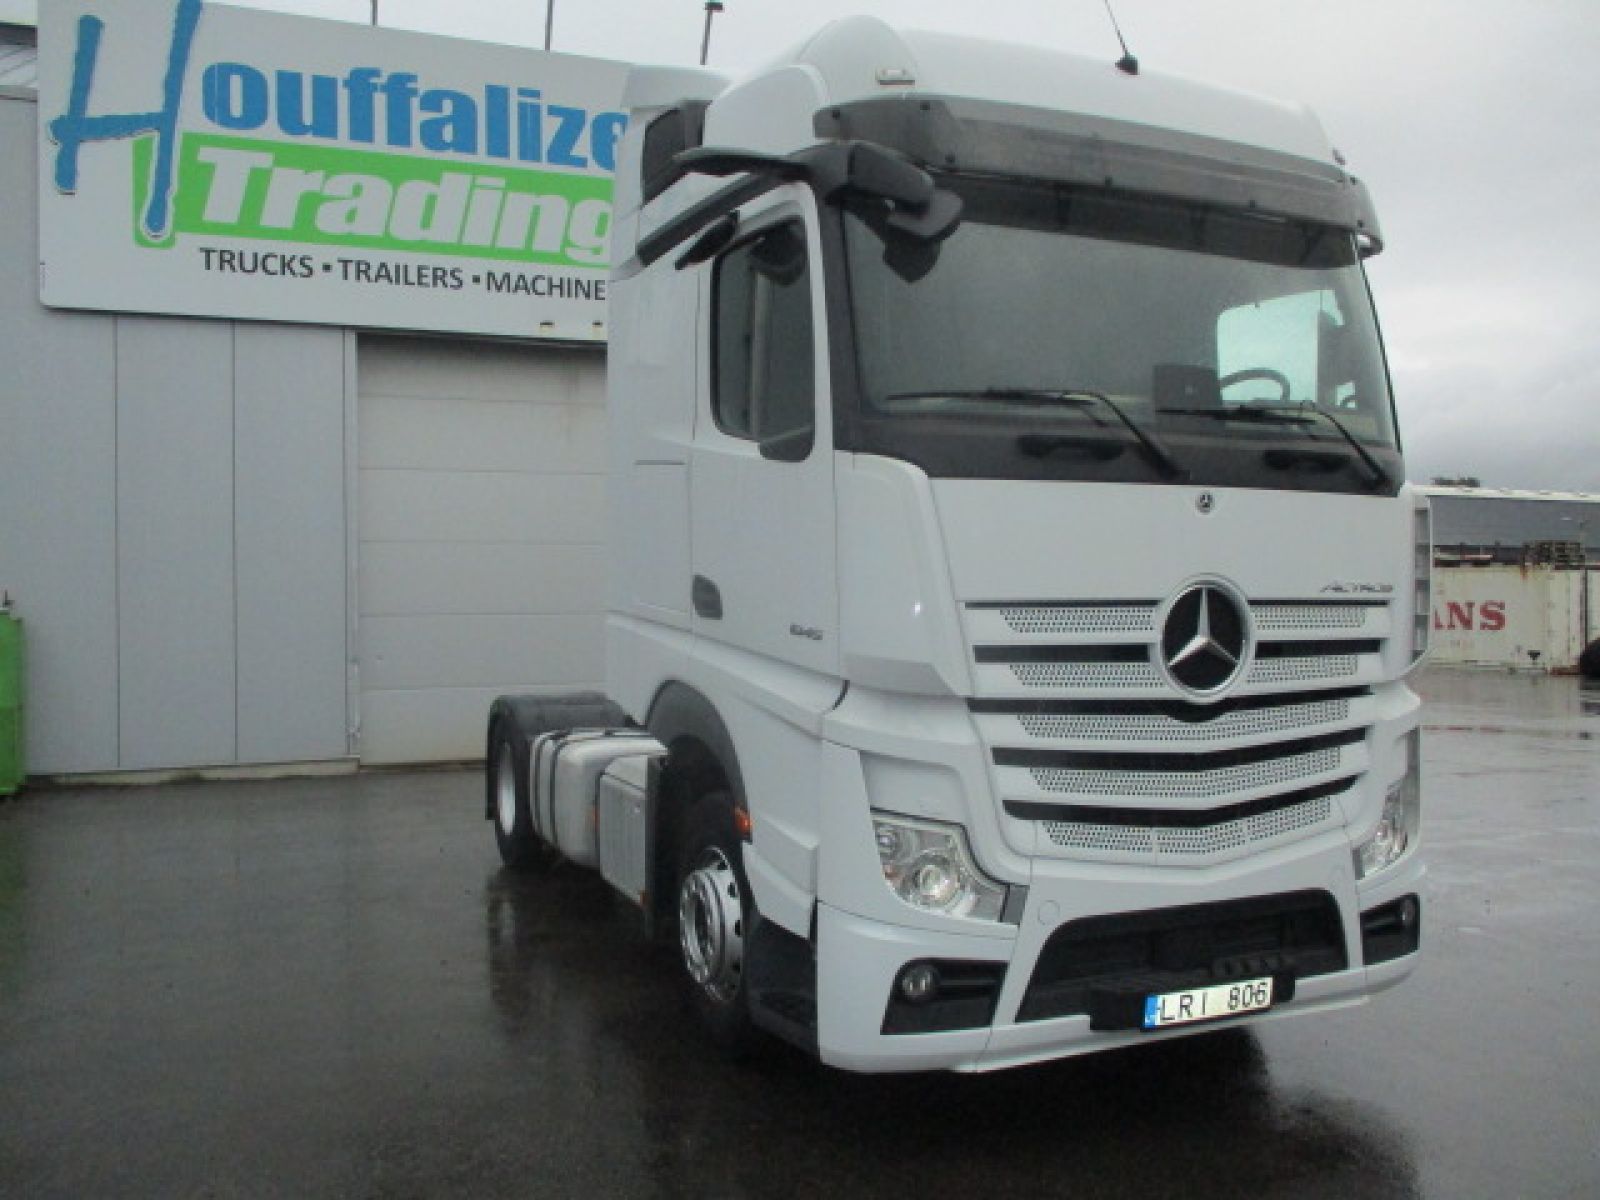 Second hand sale Tractor units - MERCEDES ACTROS 1845  Tracteur (Belgique - Europe) - Houffalize Trading s.a.